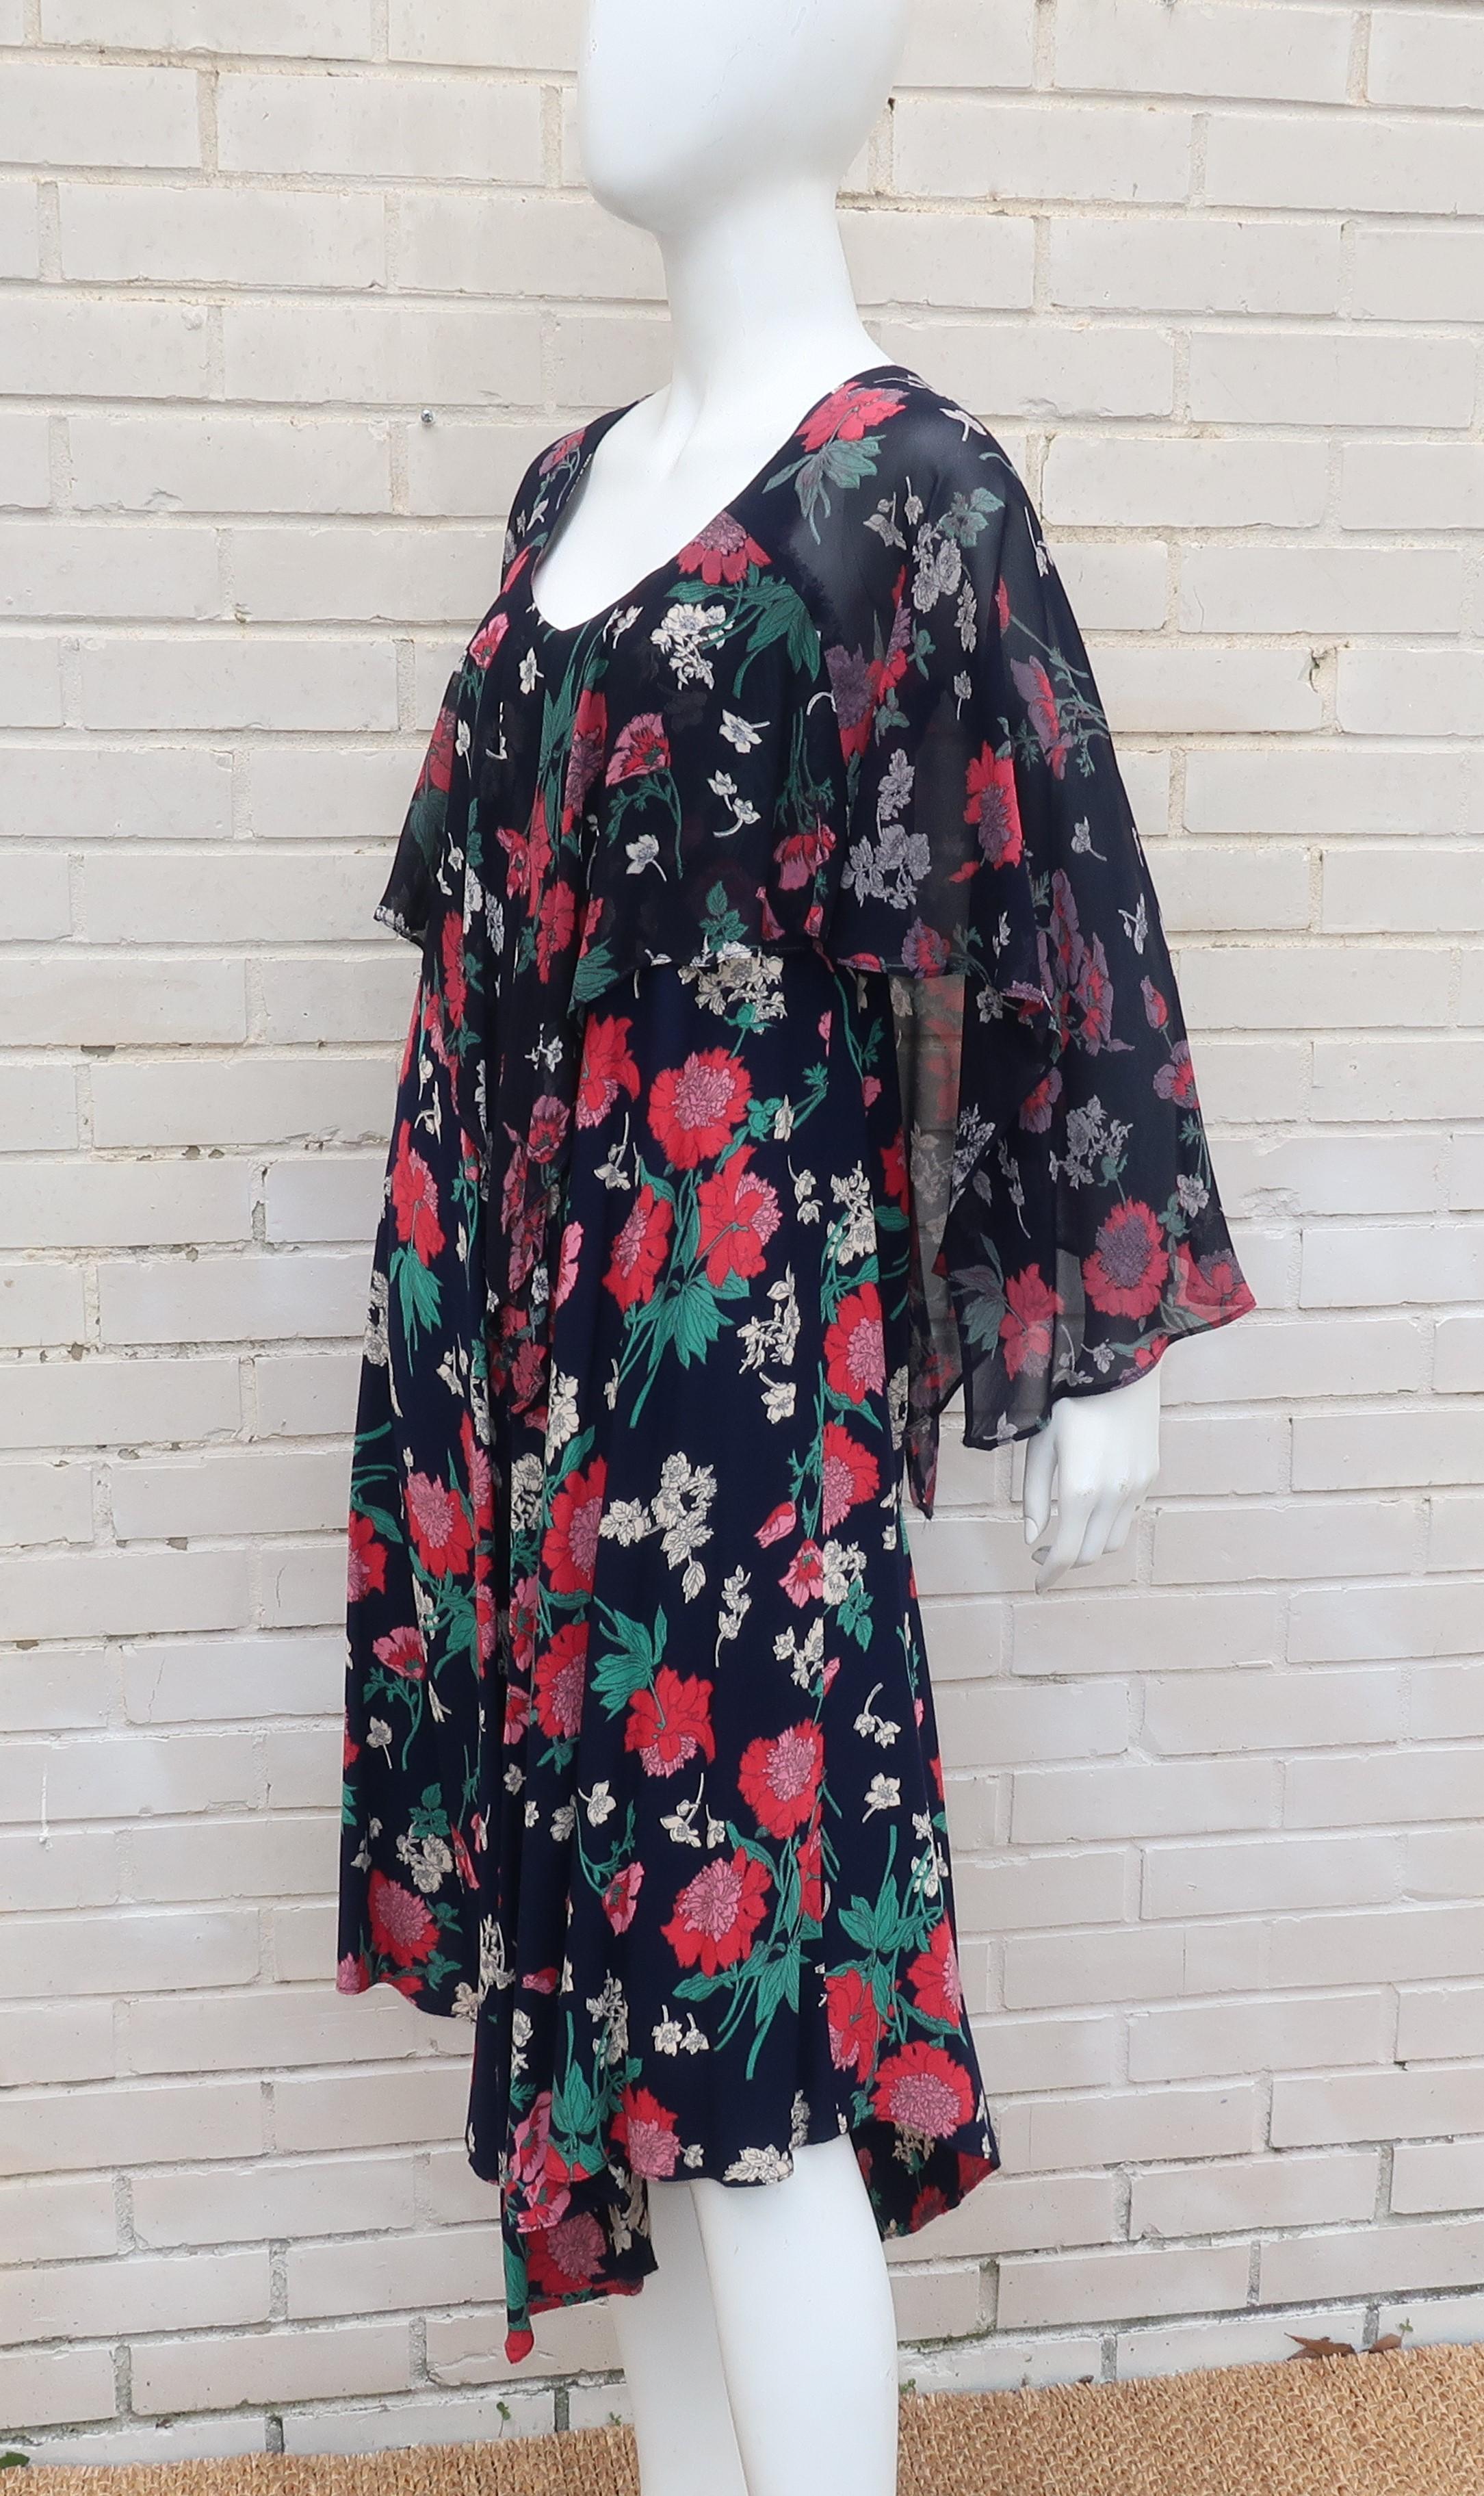 Early Nicole Miller 1970's Floral Bohemian Dress With Overlay  3